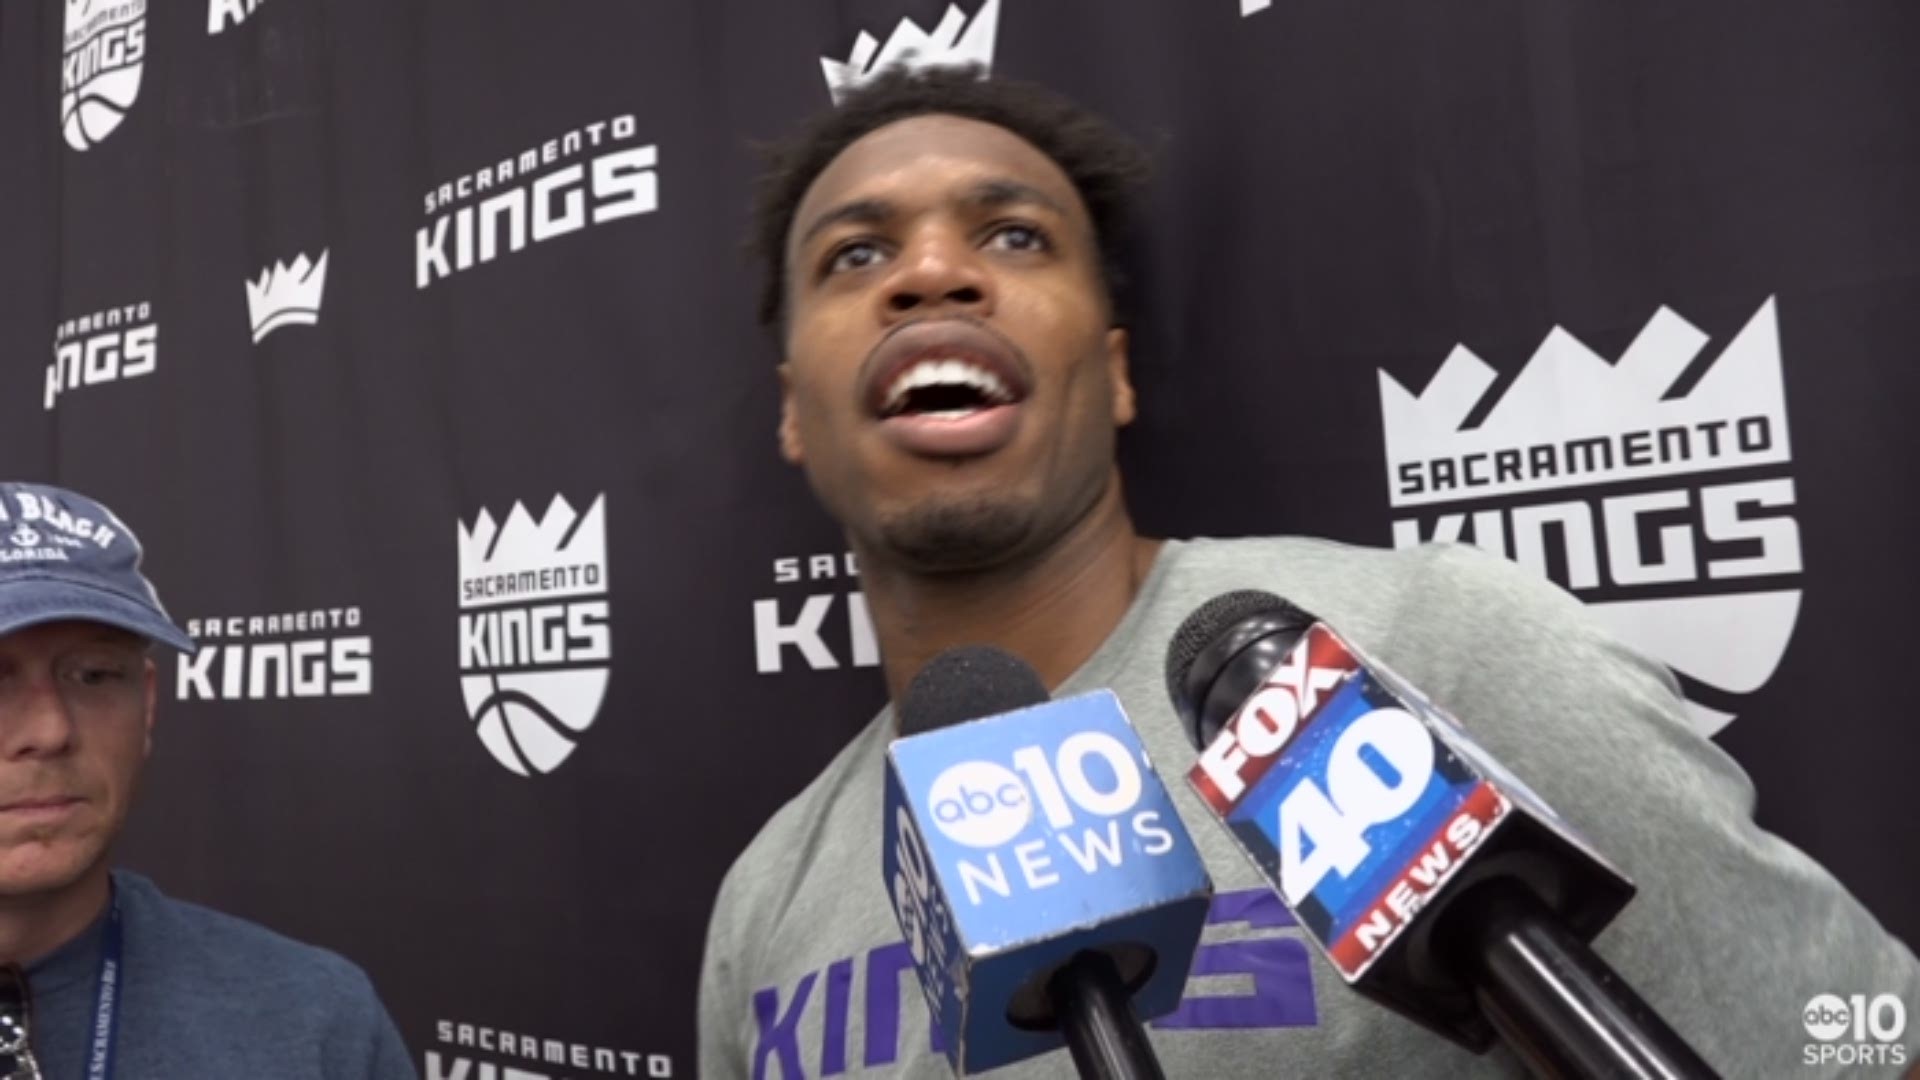 Kings guard Buddy Hield talks about the team's successful road trip, the fast pace of play Sacramento is playing with and the upcoming return of Bogdan Bogdanovic.